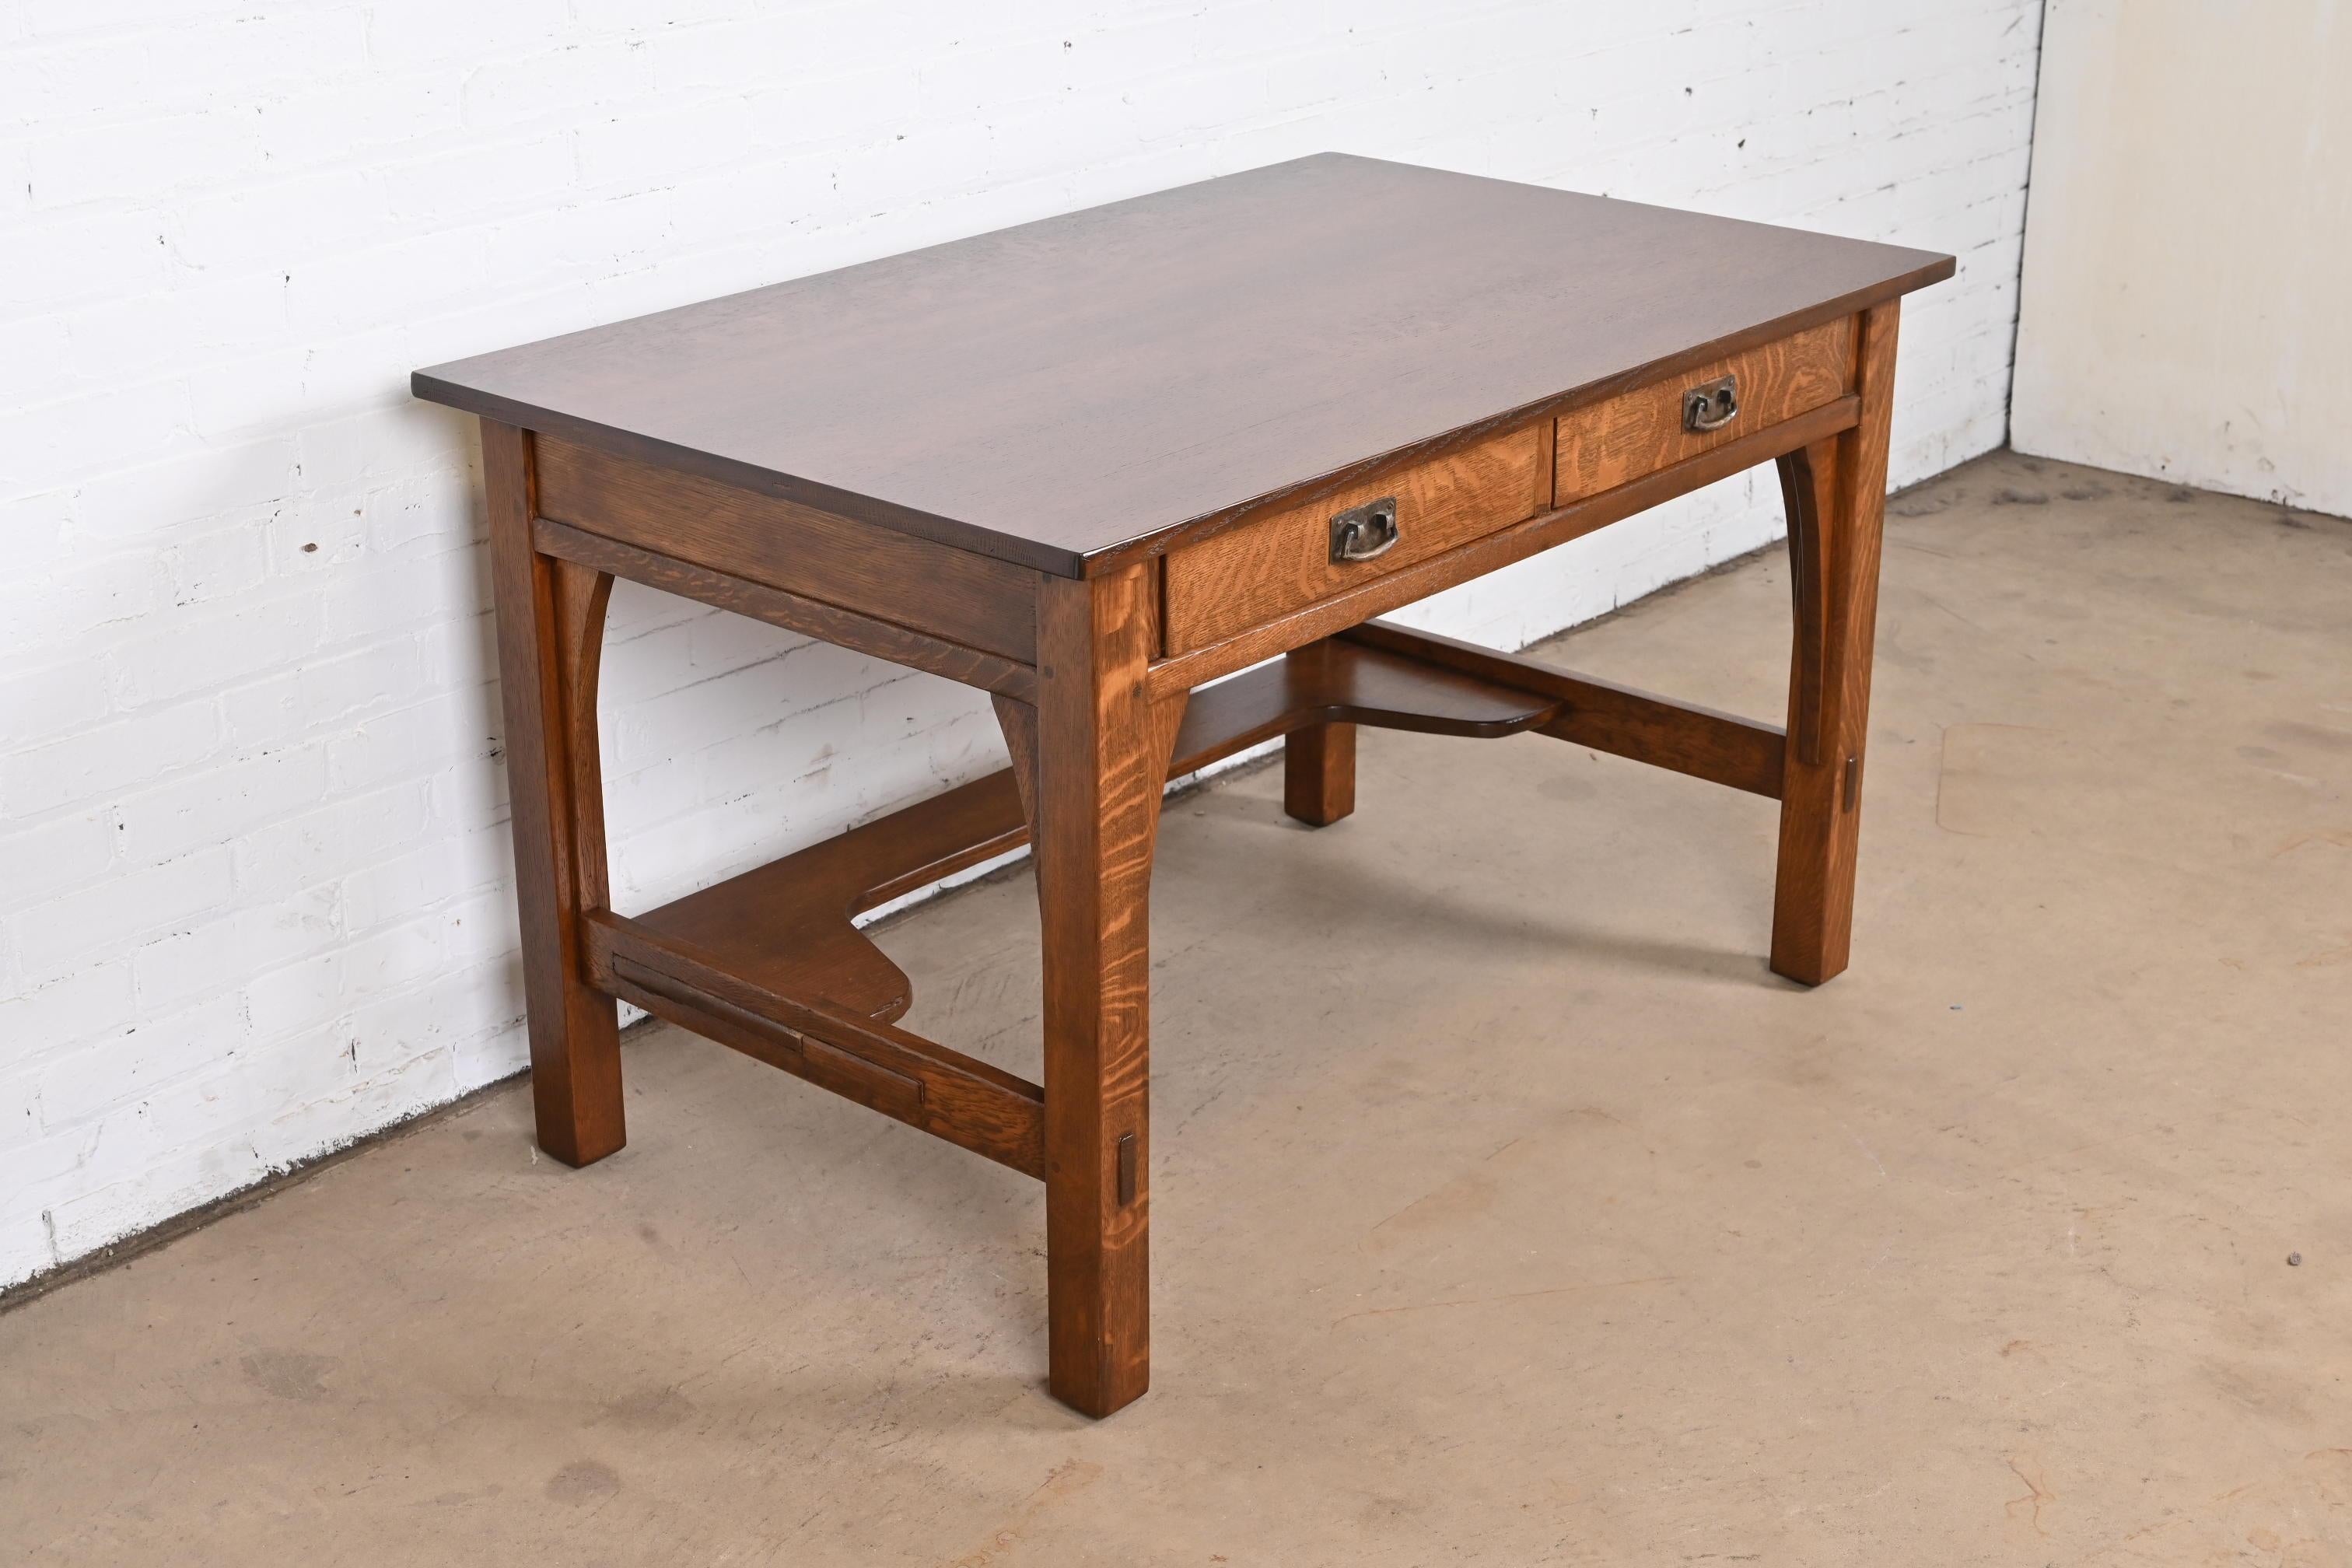 20th Century Antique Stickley Mission Oak Arts & Crafts Desk or Library Table, Newly Restored